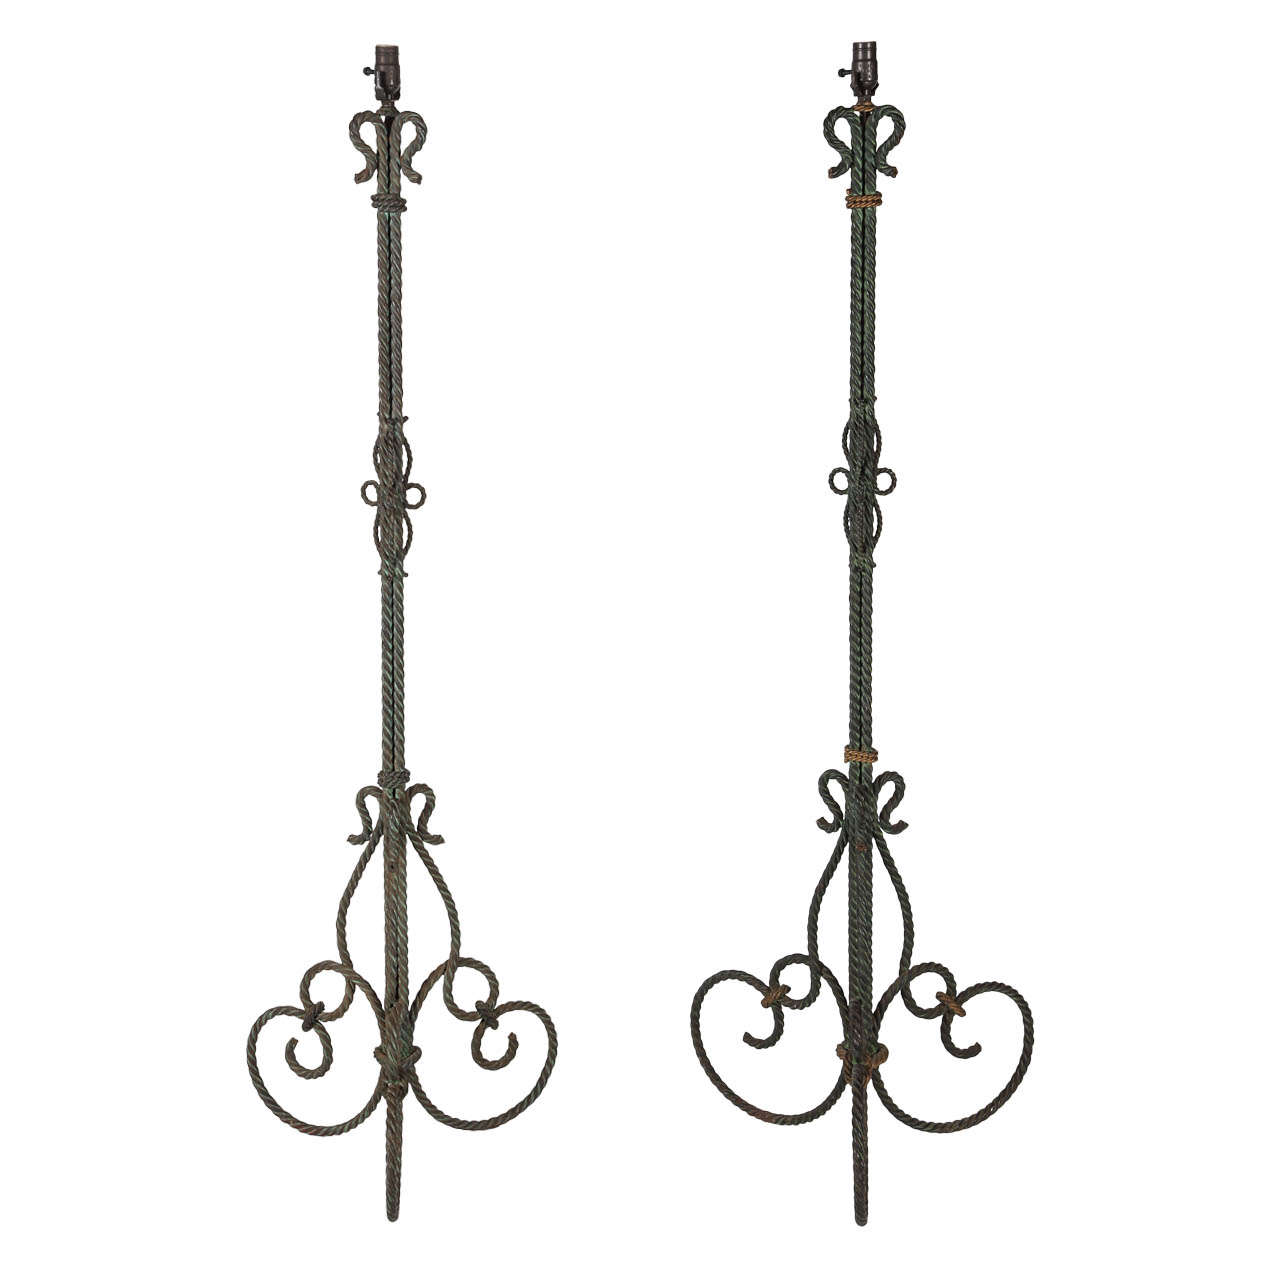 1940's French Gilt-Iron Rope Floor Lamps, Pair For Sale